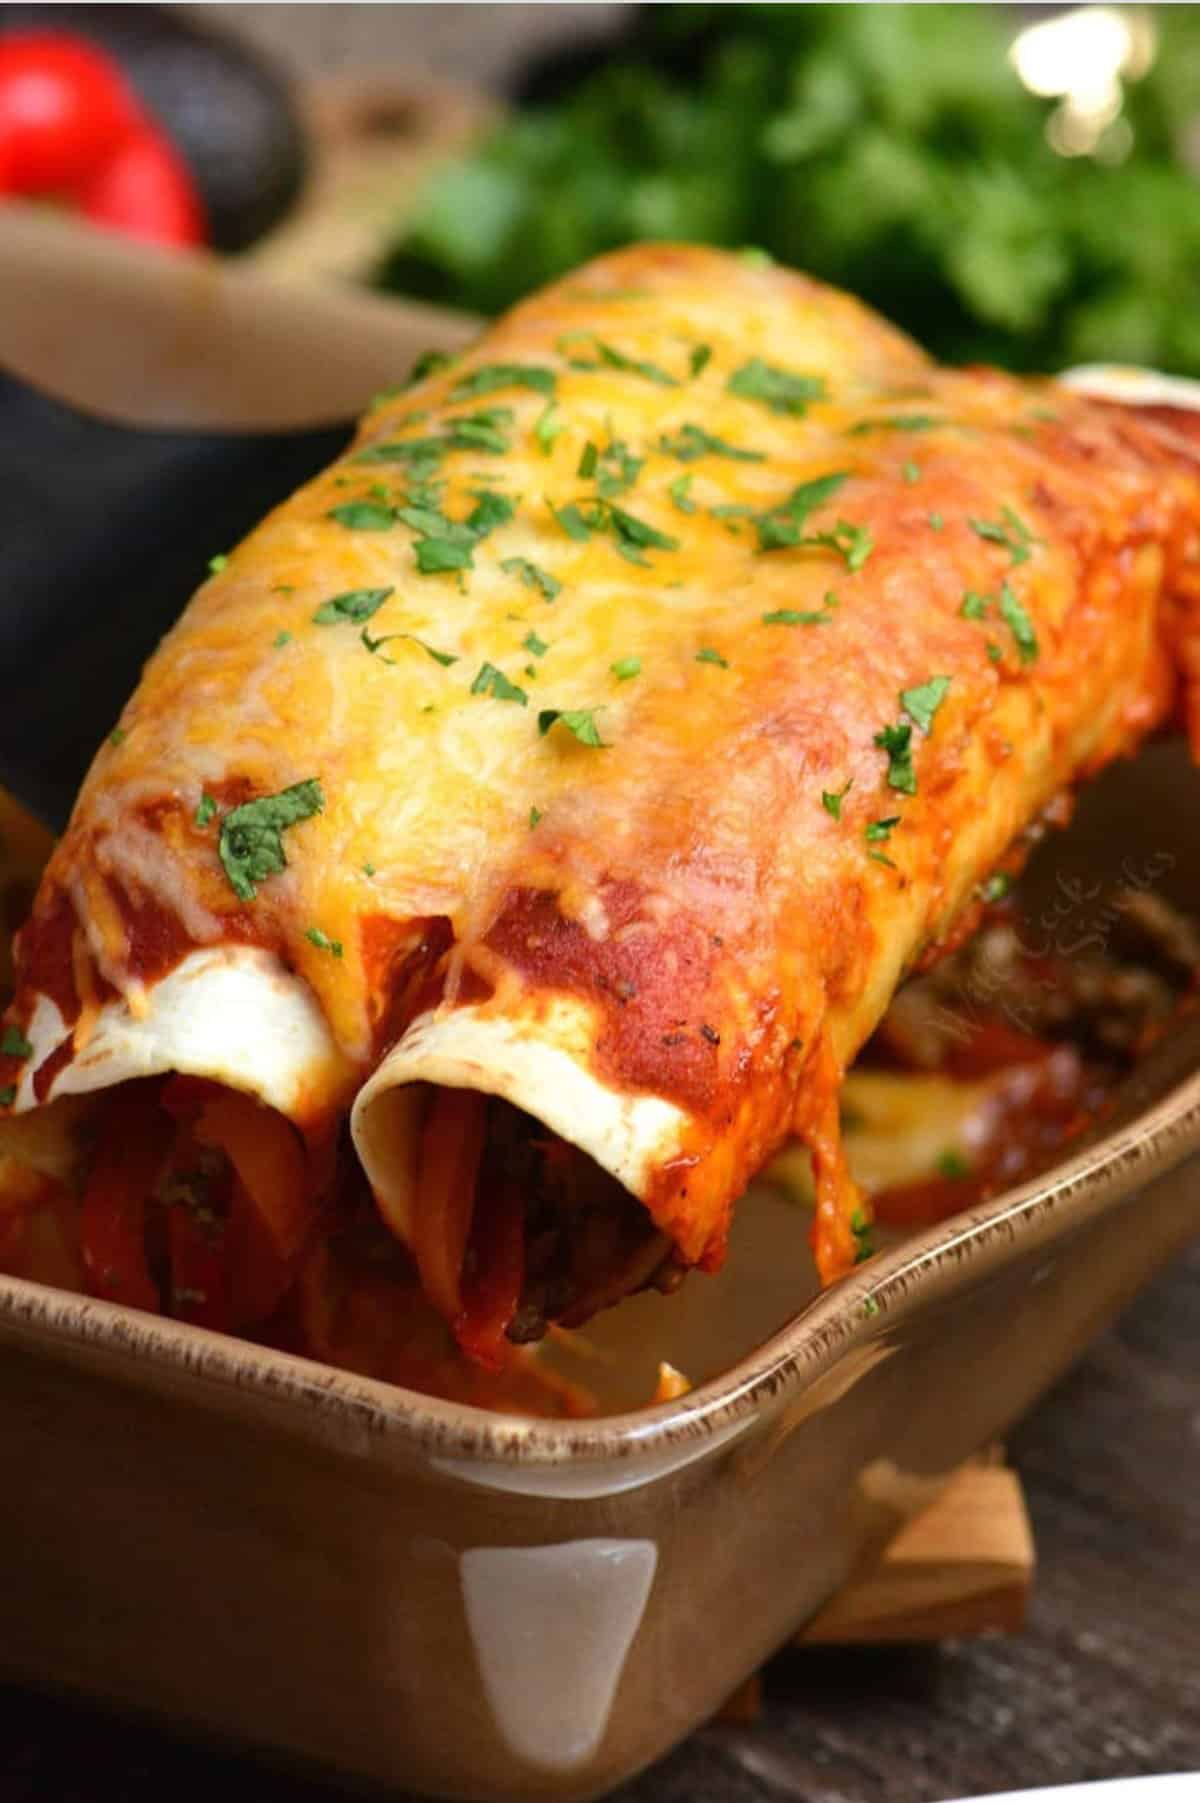 pulling out two cheesy enchiladas from the baking dish.